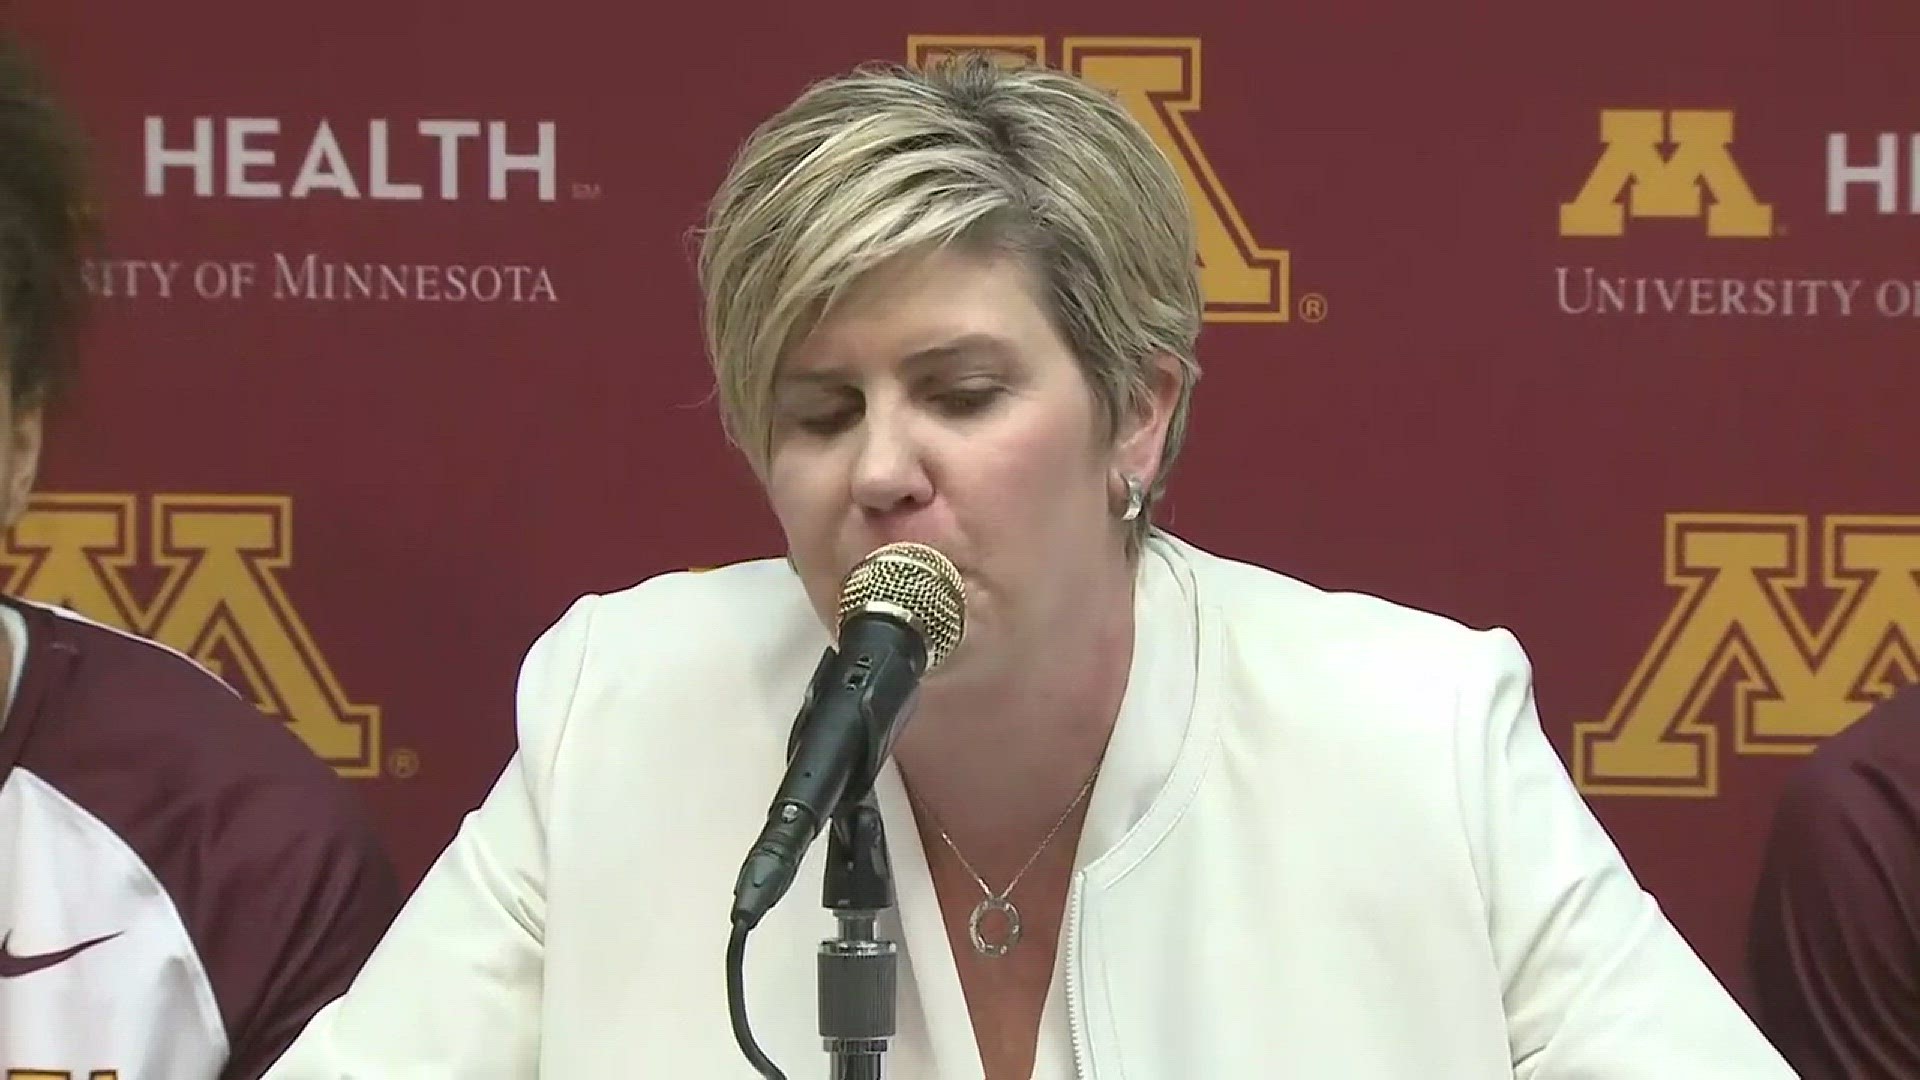 Postgame reaction from Gophers Women's Basketball Coach Marlene Stollings, G/F Destiny Pitts, and G Carlie Wagner after their Top 10 takedown of Maryland Sunday afternoon at Williams Arena